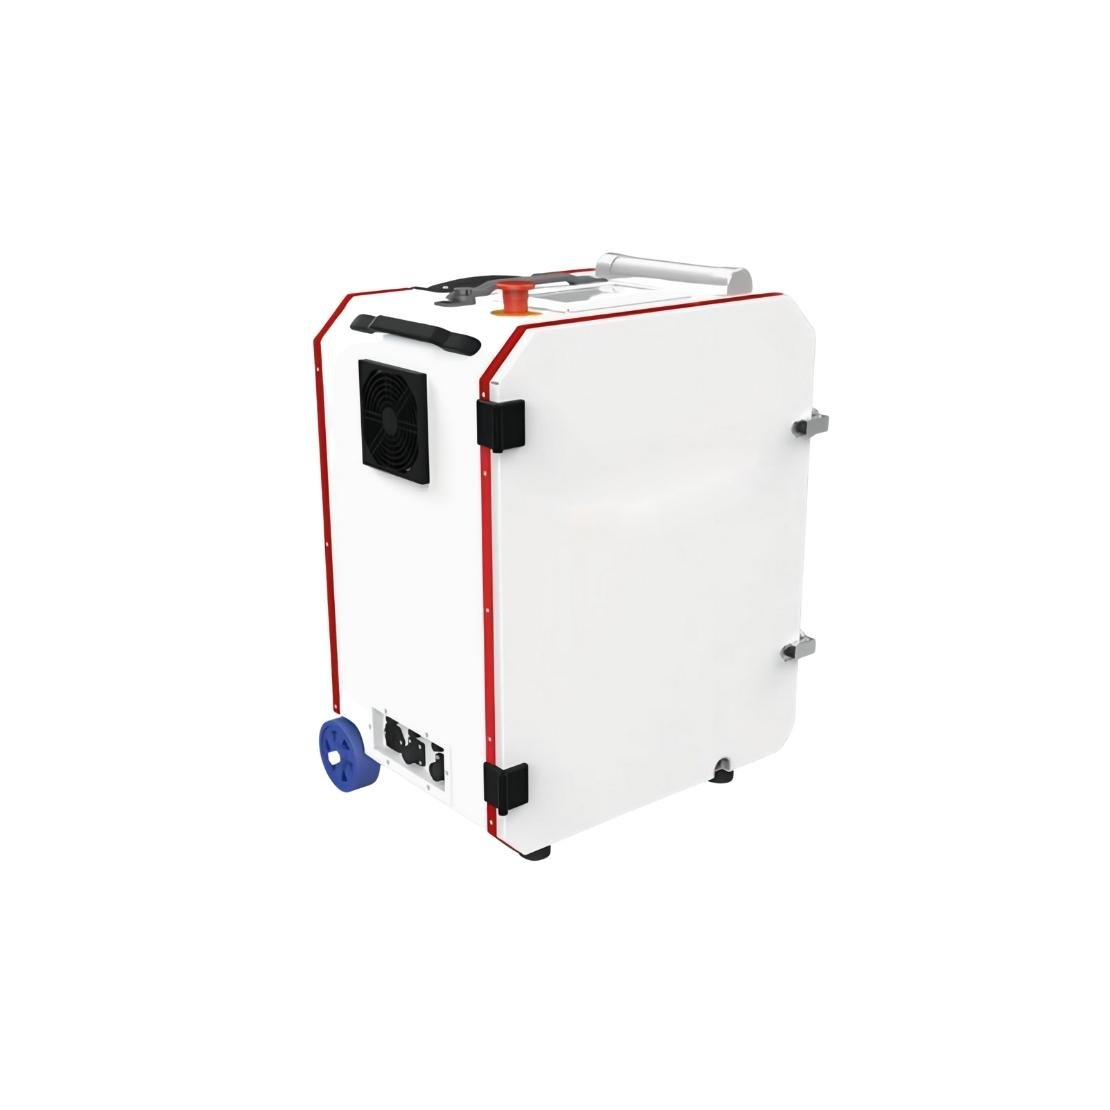 200W portable laser cleaning machine